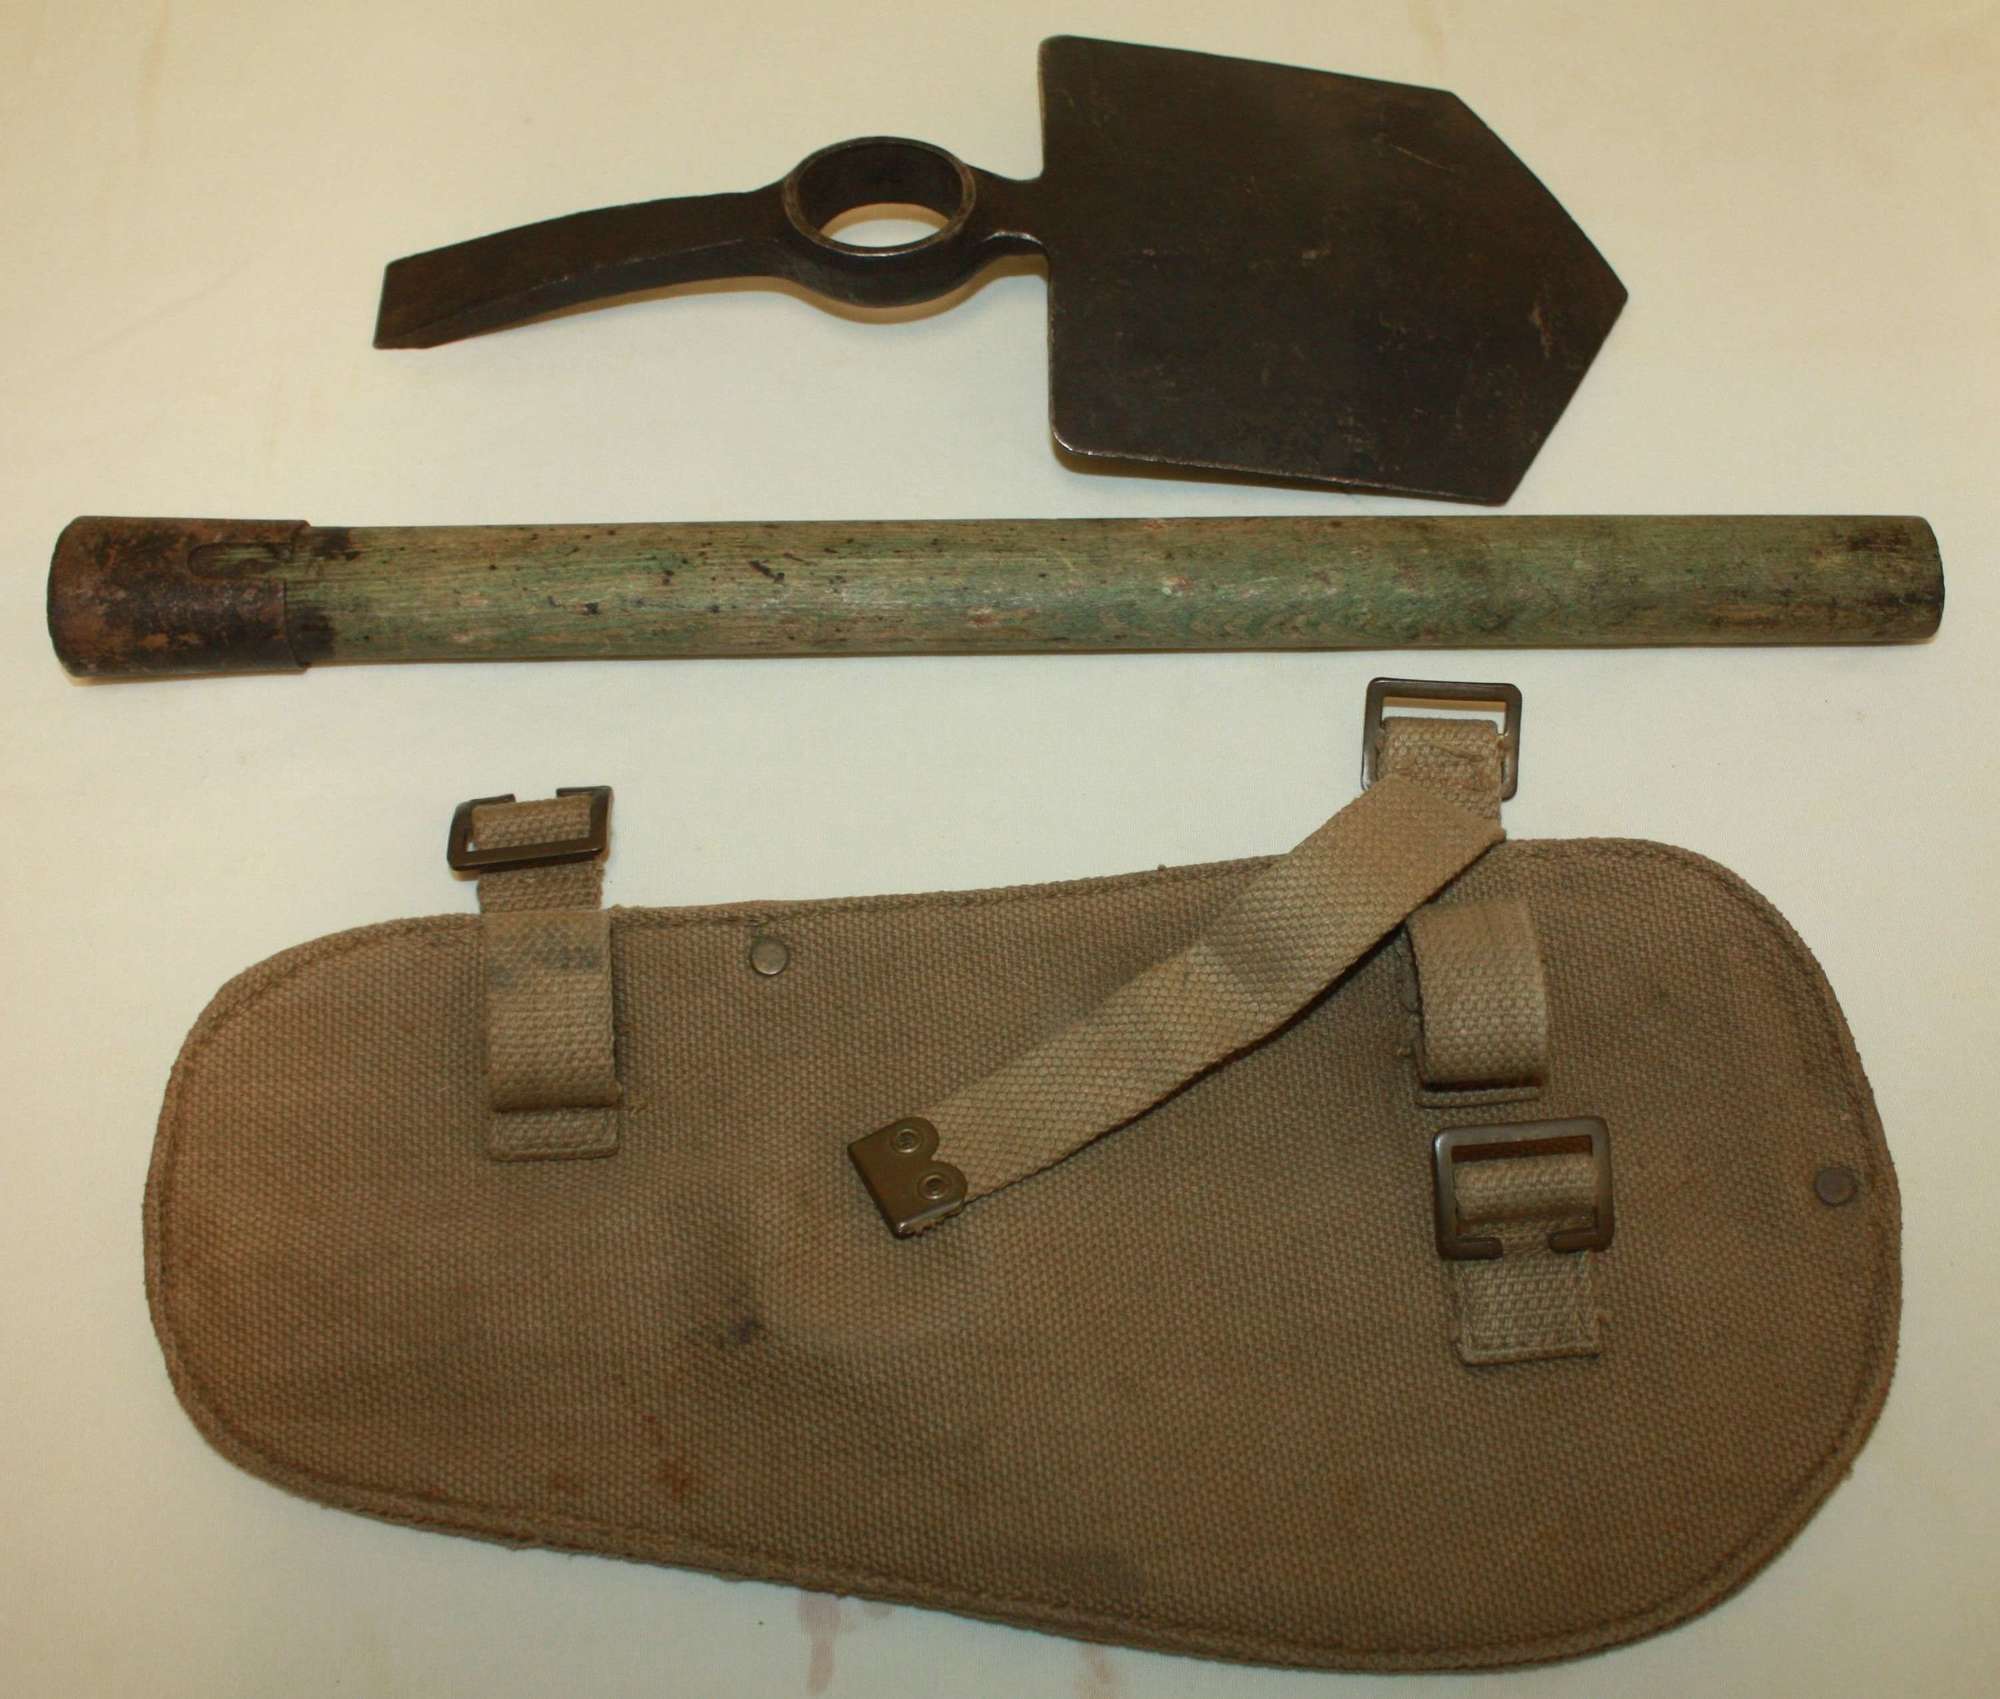 A GOOD 1944 DATED BRITISH 37 PATTERN ENTRENCHING TOOL SET